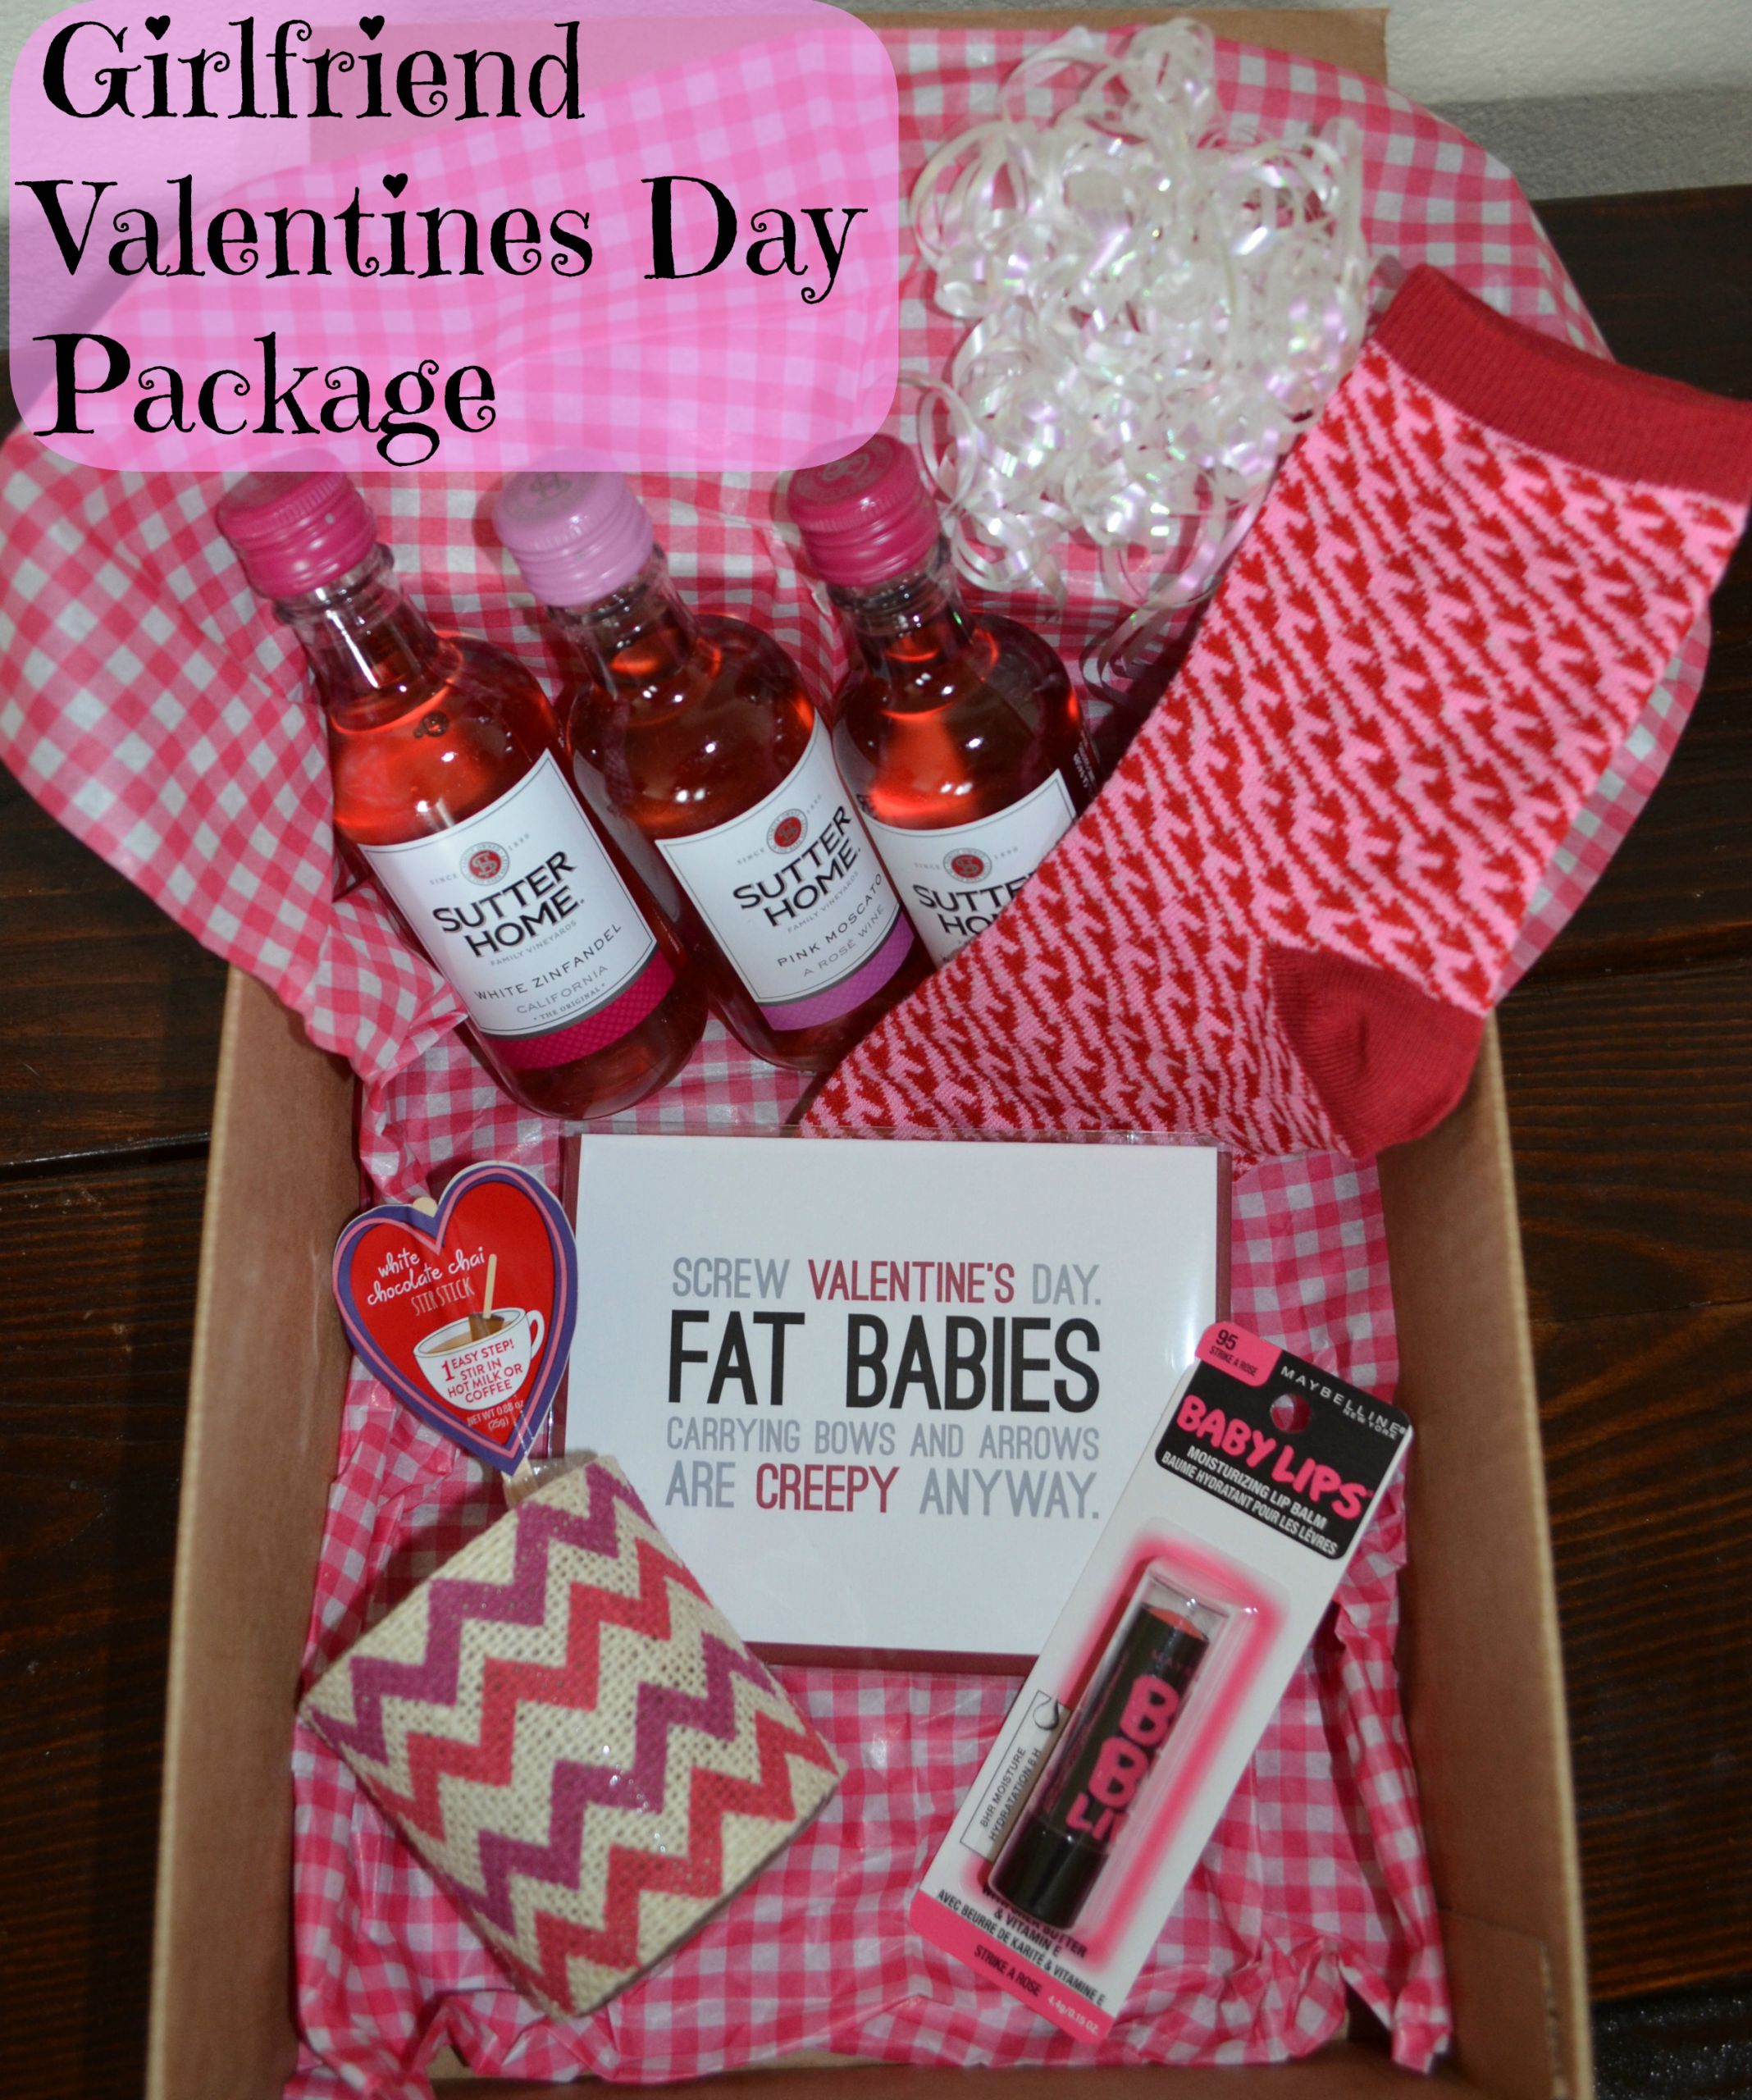 Cute Valentines Gift Ideas
 24 LOVELY VALENTINE S DAY GIFTS FOR YOUR BOYFRIEND